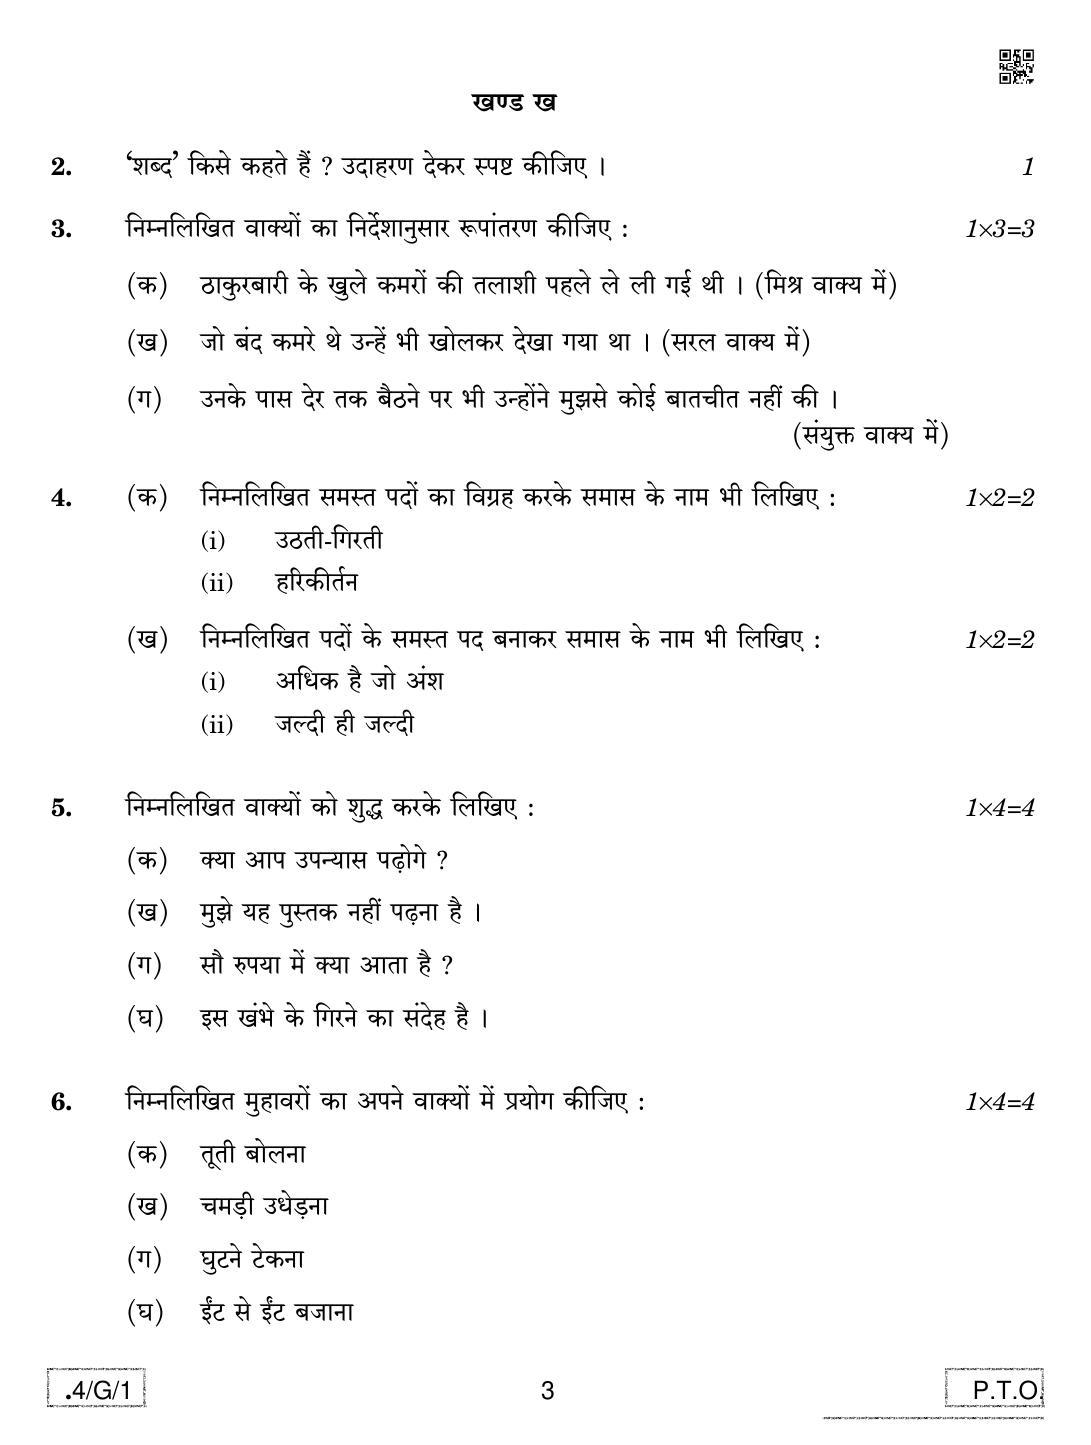 CBSE Class 10 4-C-1 Hindi B 2020 Compartment Question Paper - Page 3